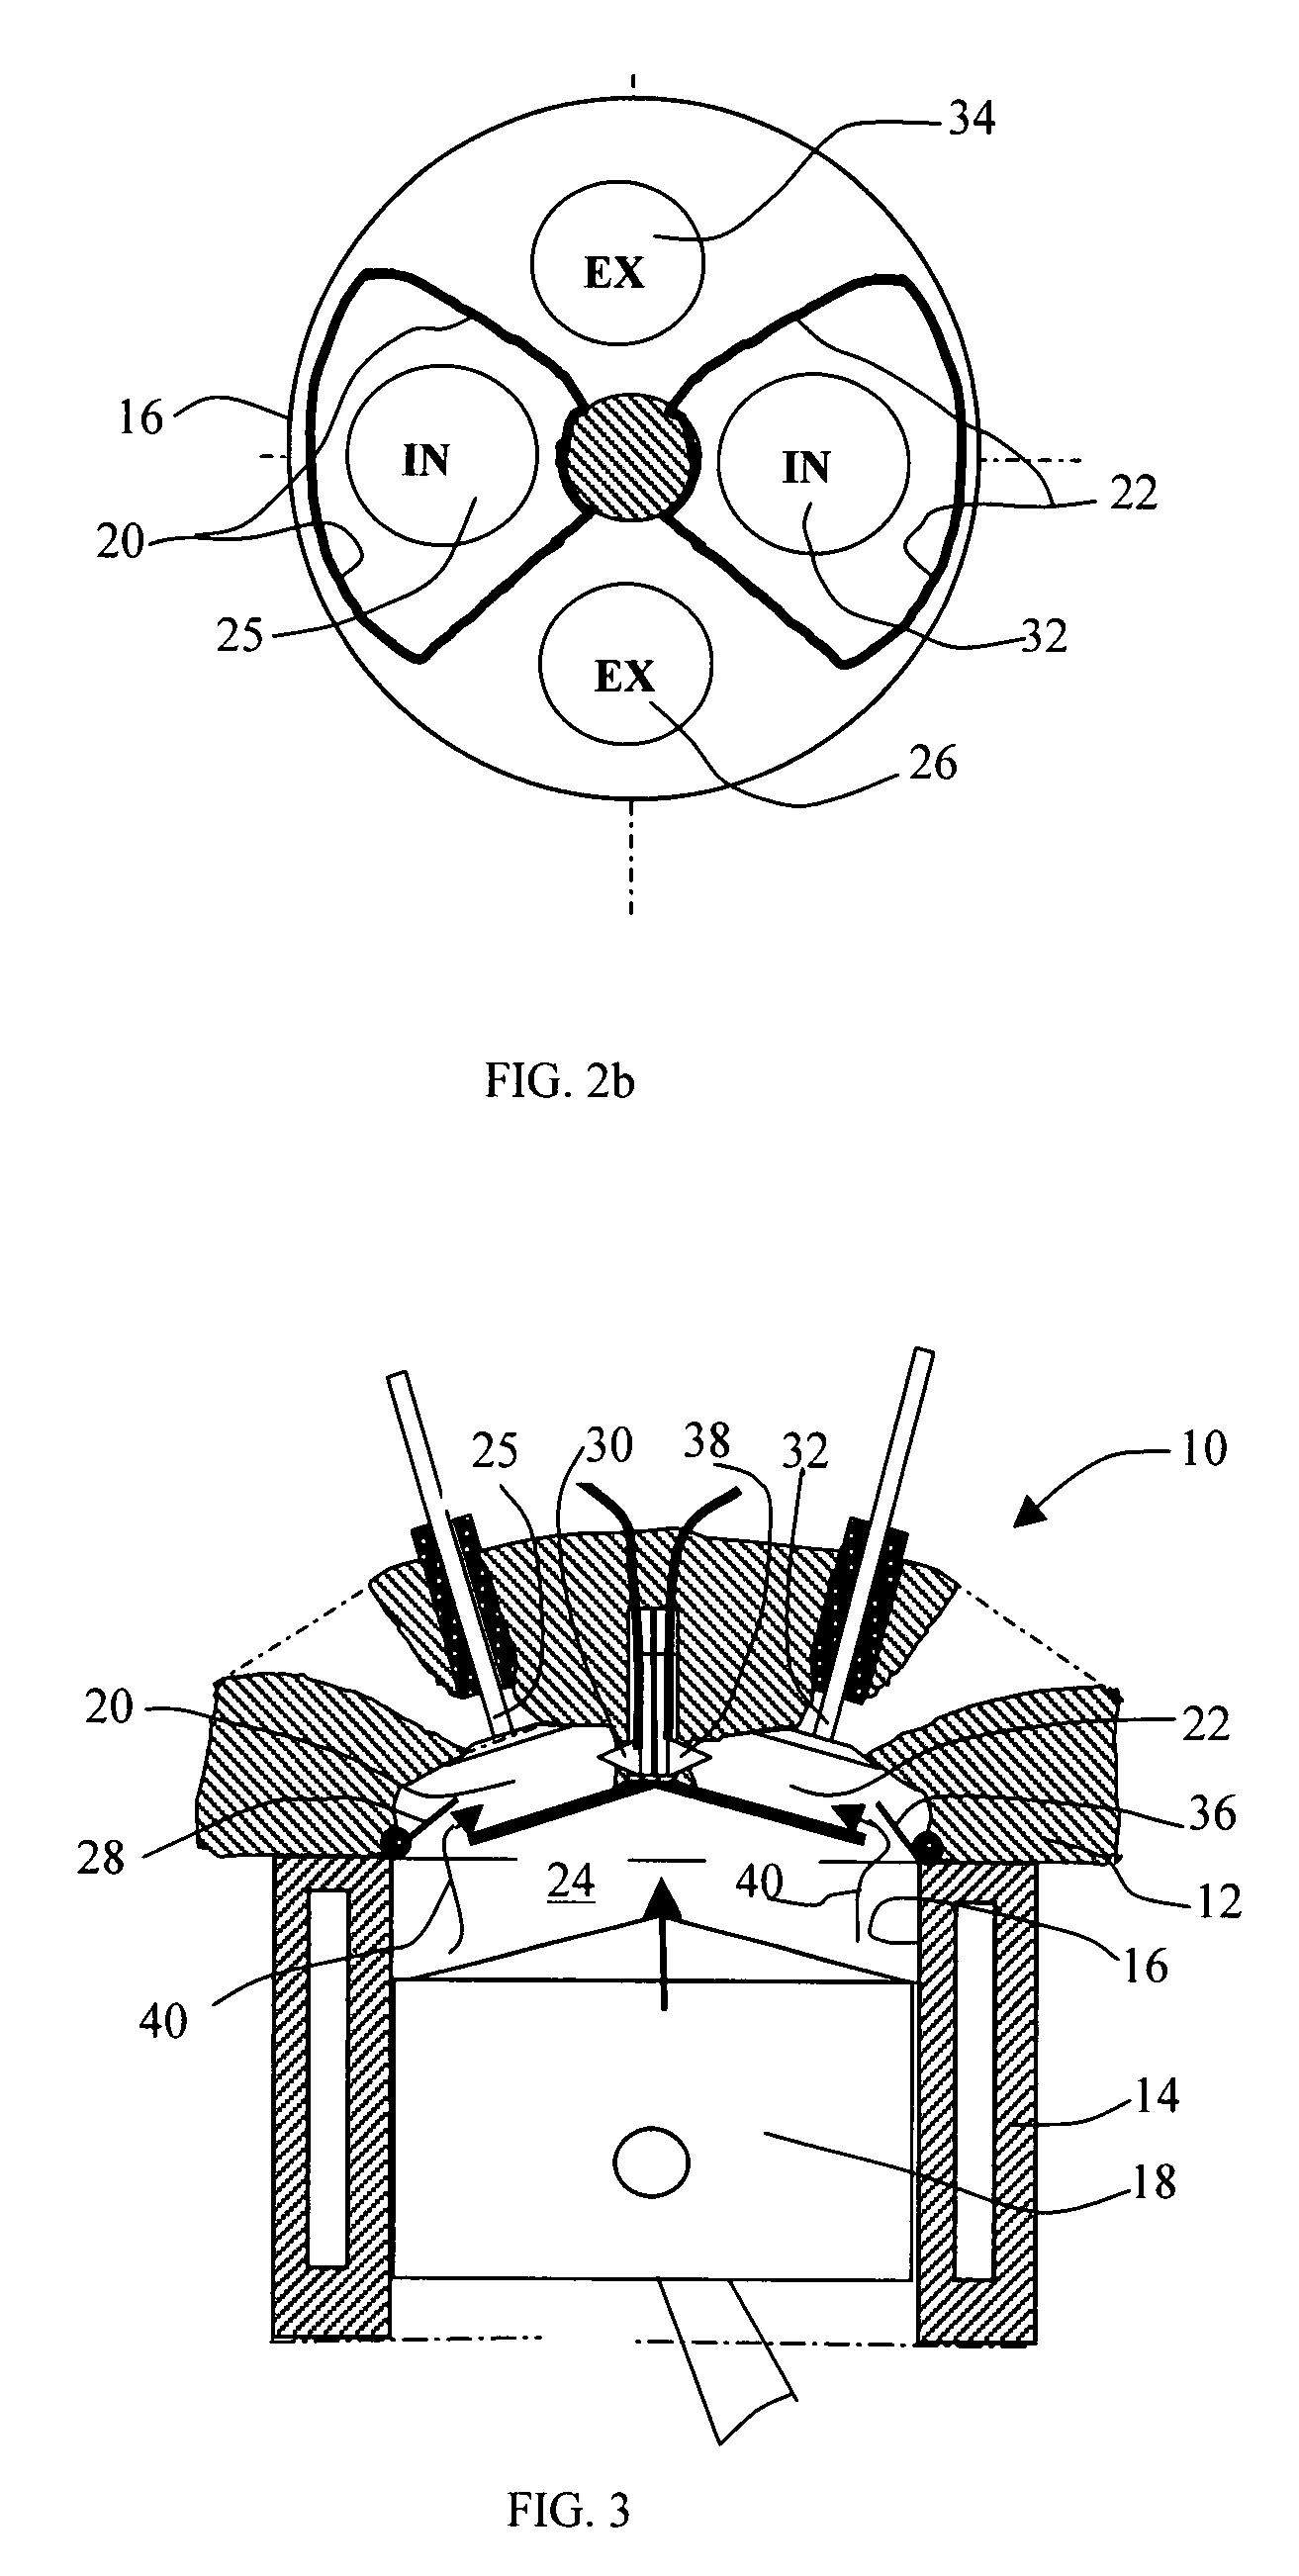 Cao cycles of internal combustion engine with increased expansion ratio, constant-volume combustion, variable compression ratio, and cold start mechanism